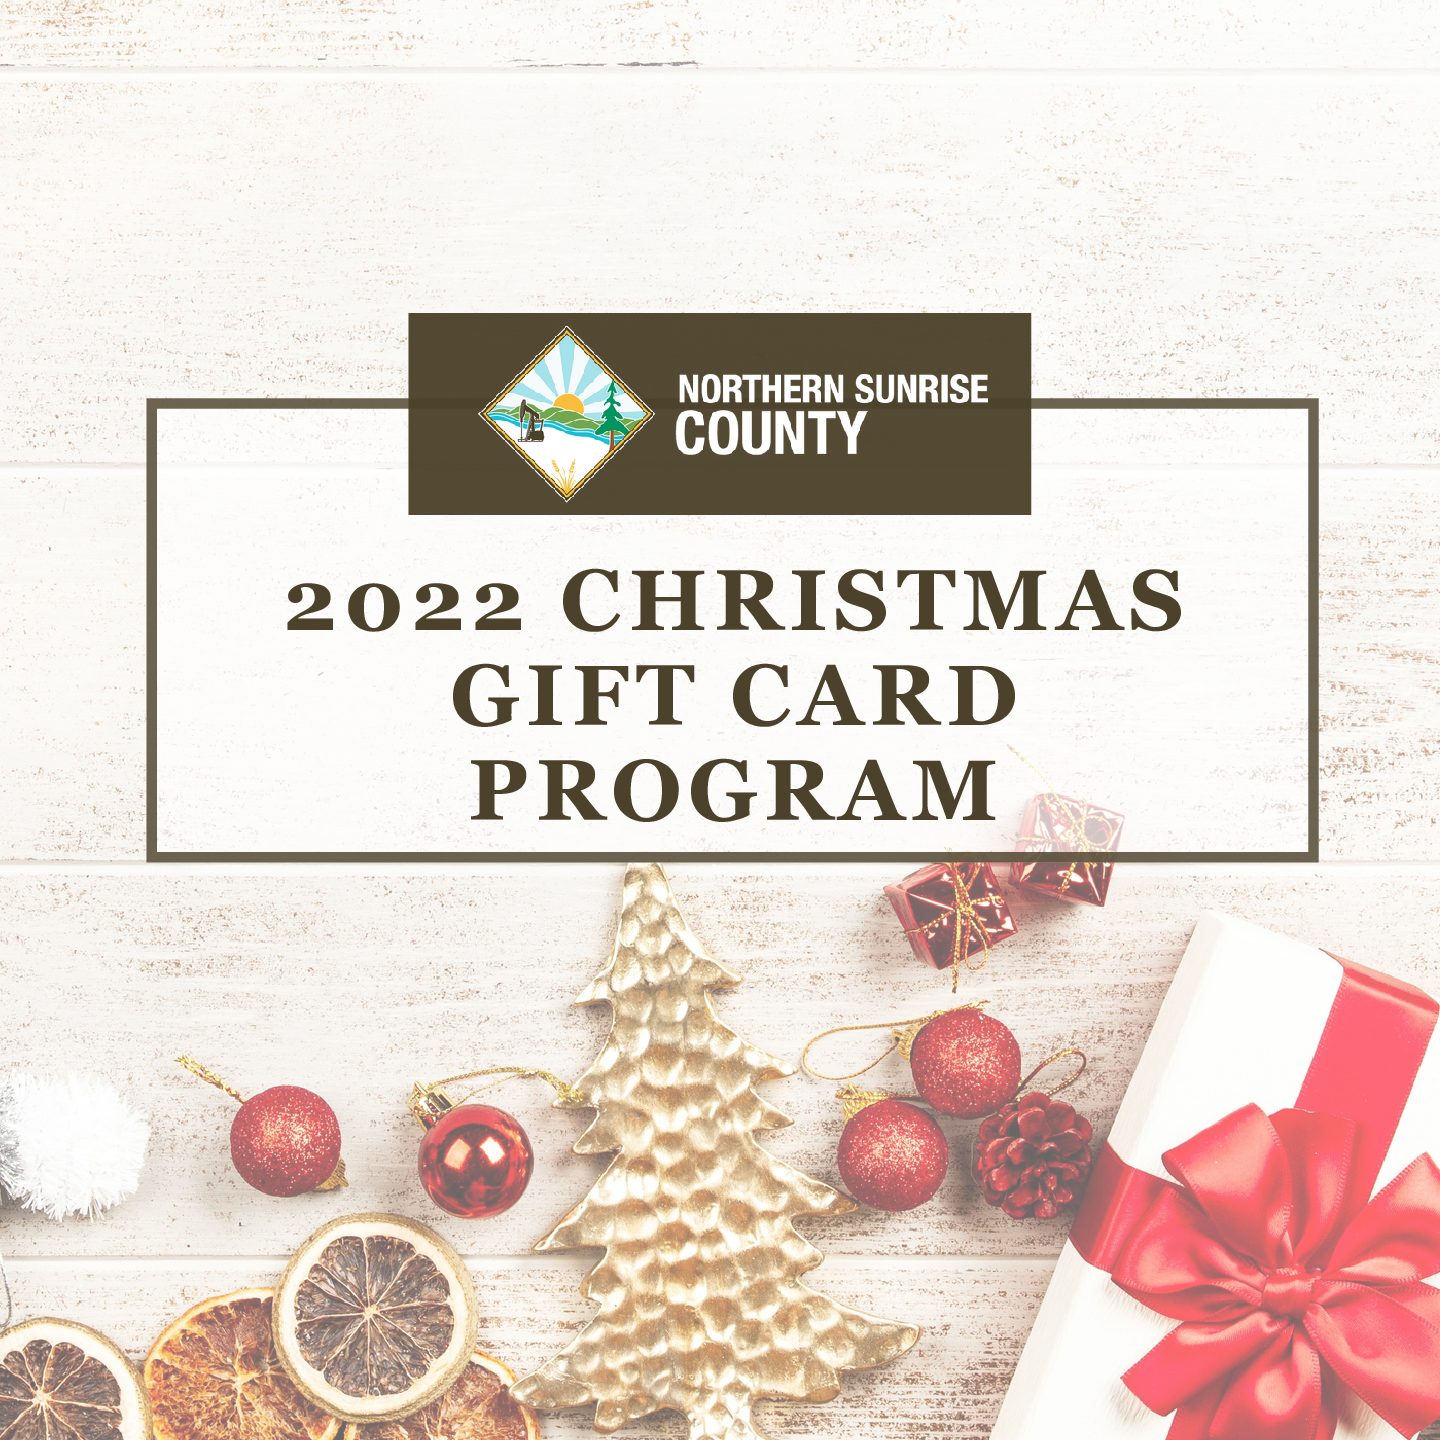 Featured image for “2022 Christmas Gift Card Program”